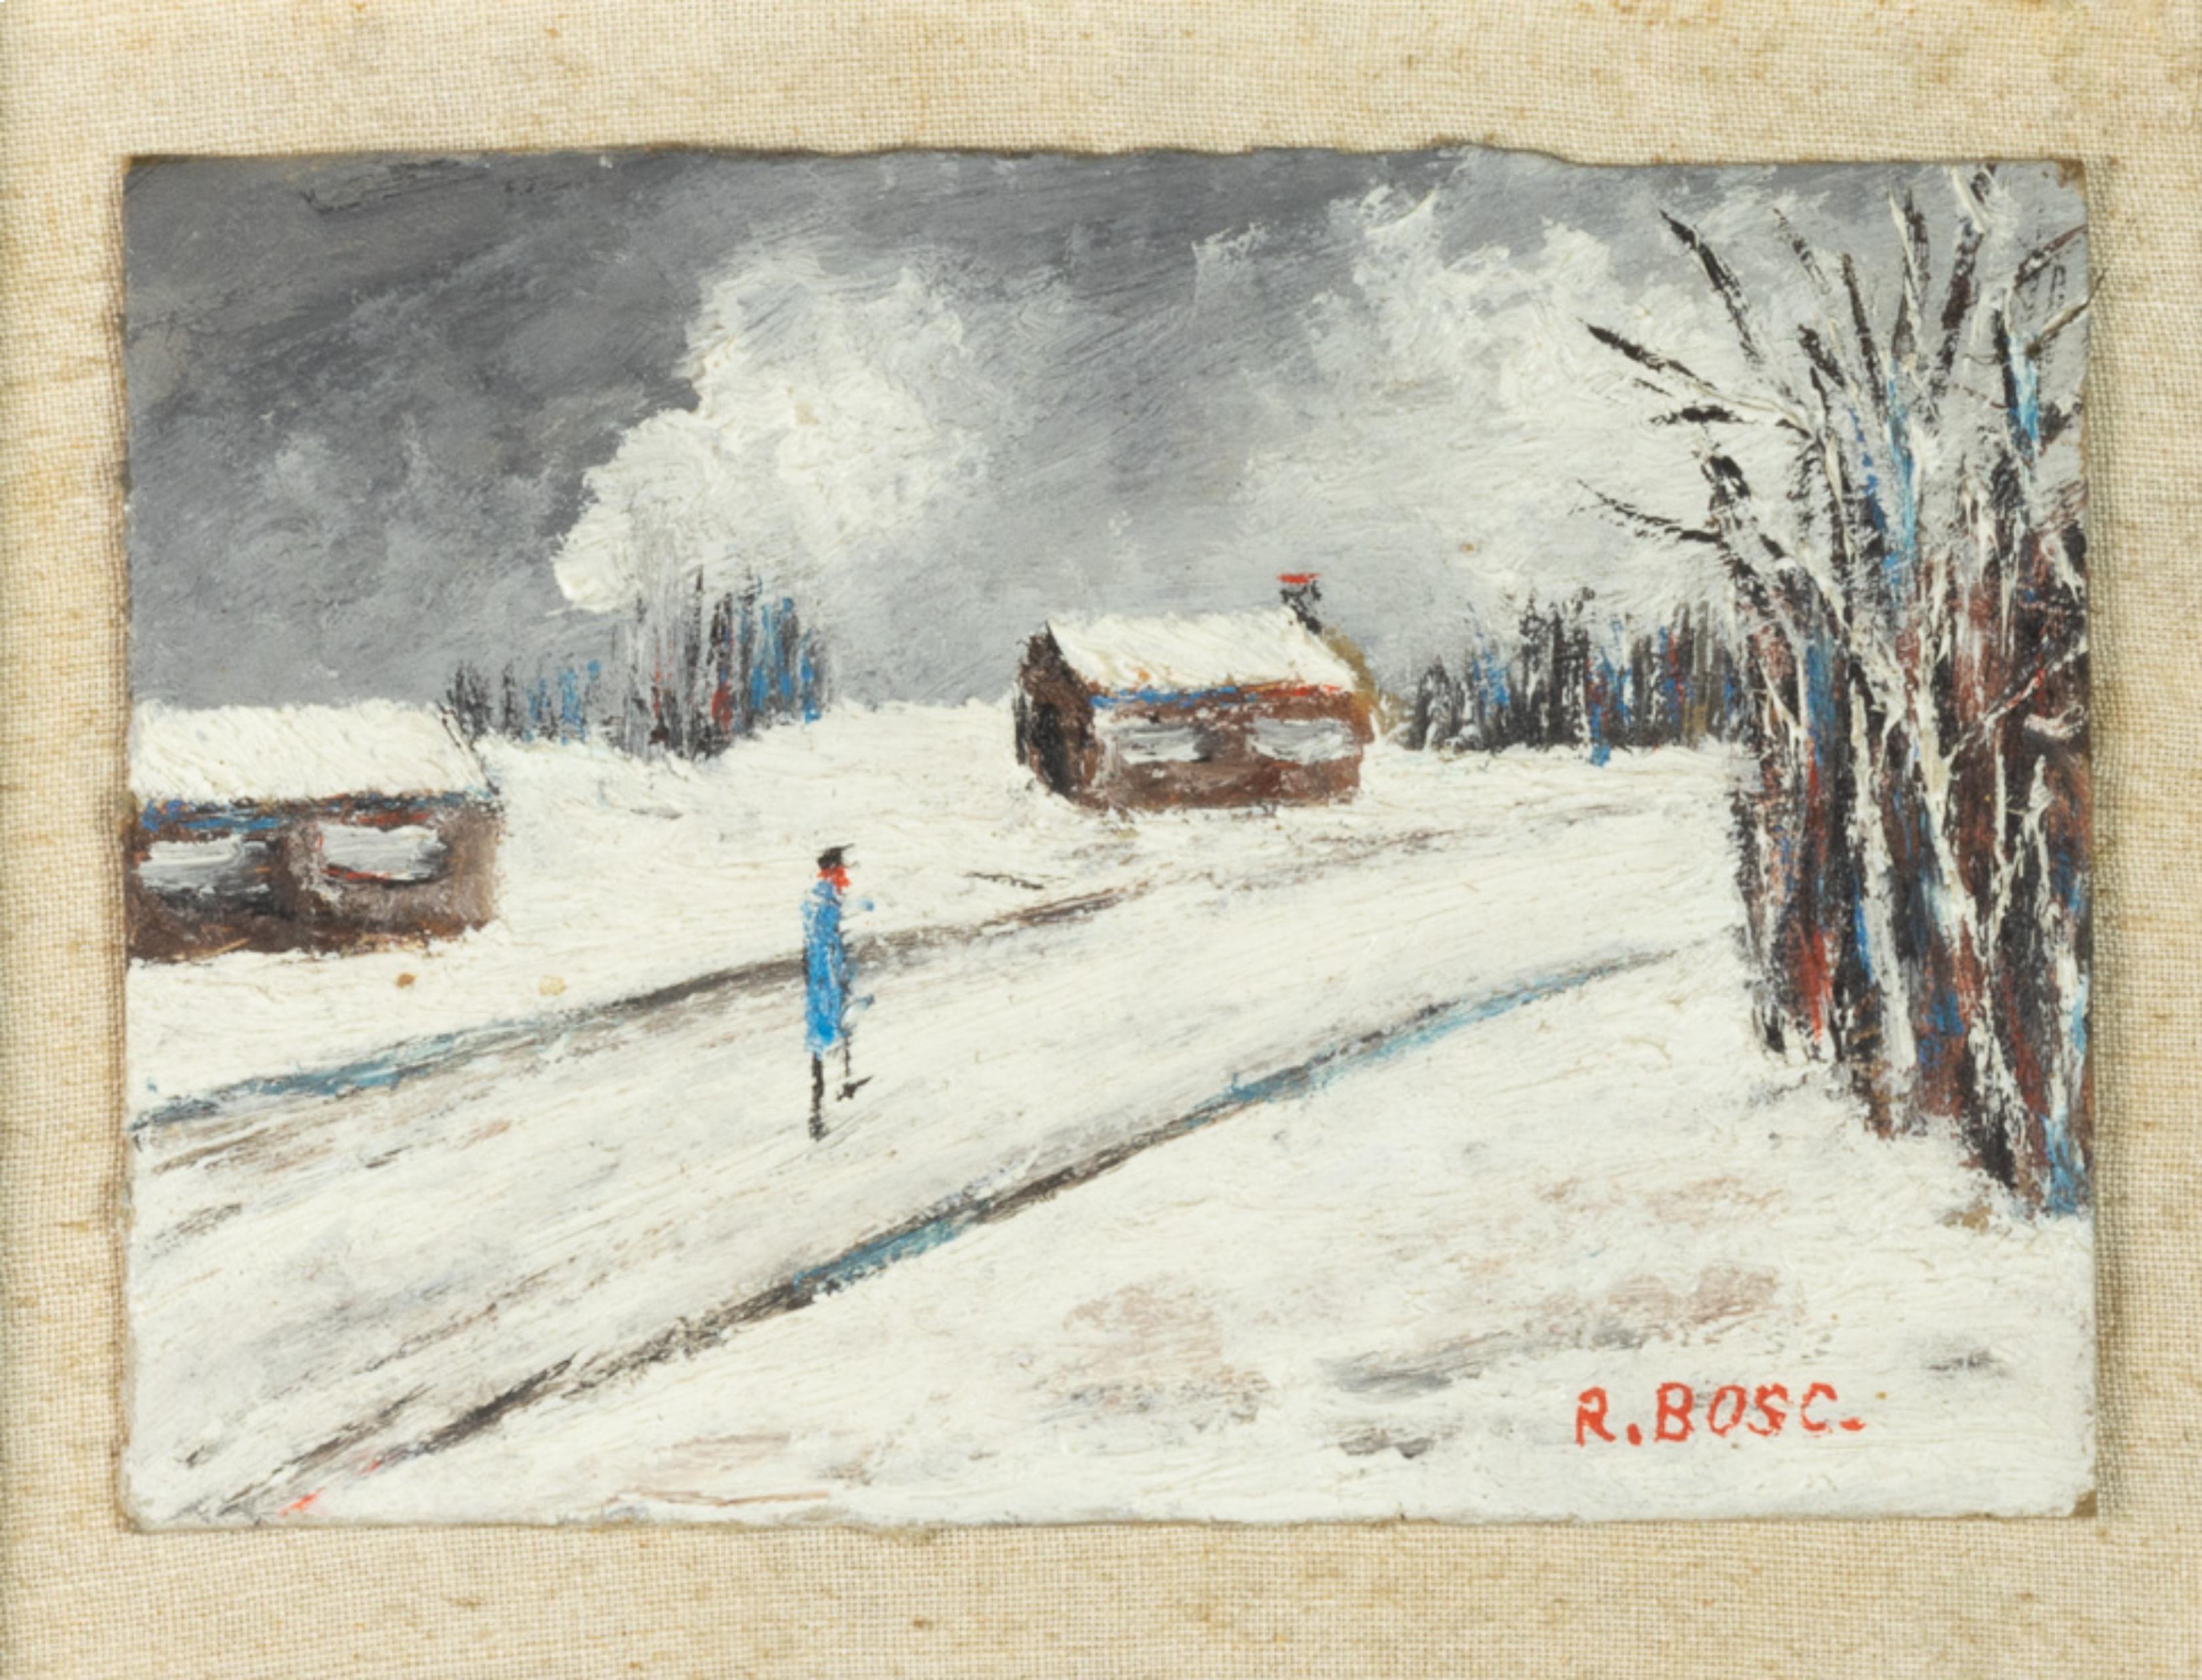 An Post-Impressionis oil painting on a composite panel from the early 20th century depicting a winter scene in the Bosque de Vincennes area, signed 